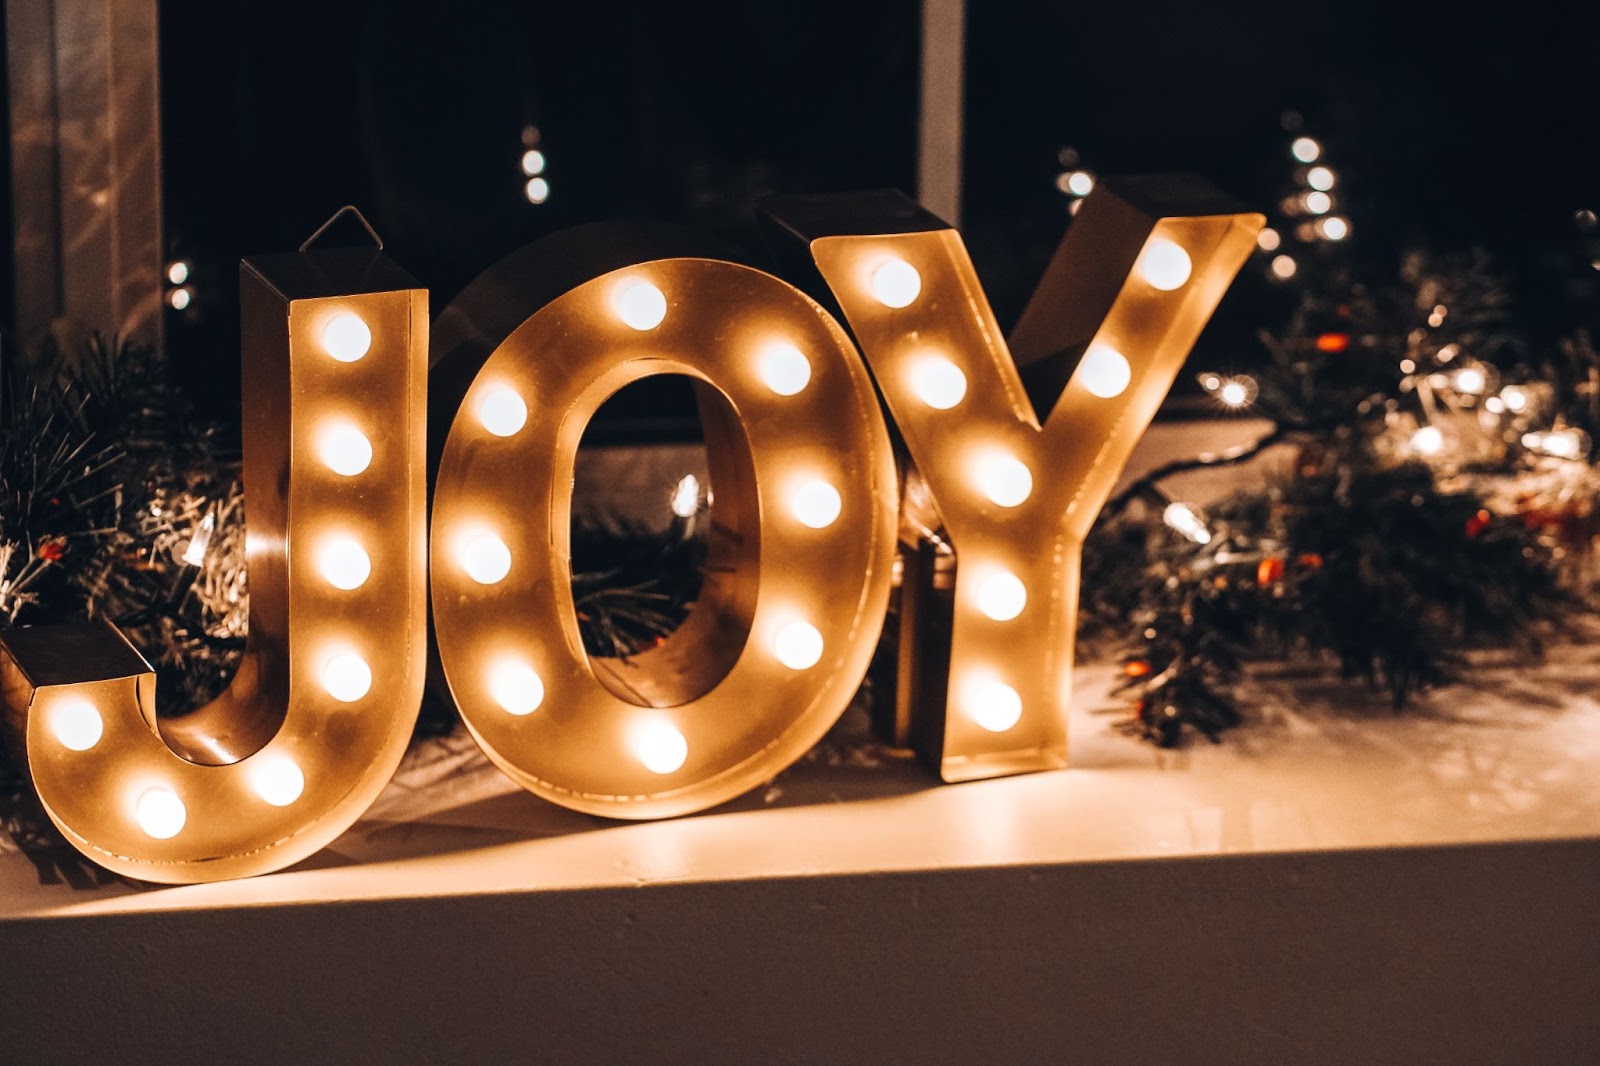 A metal-framed light display spelling JOY is sitting on a counter with various Christmas-themed greenery.